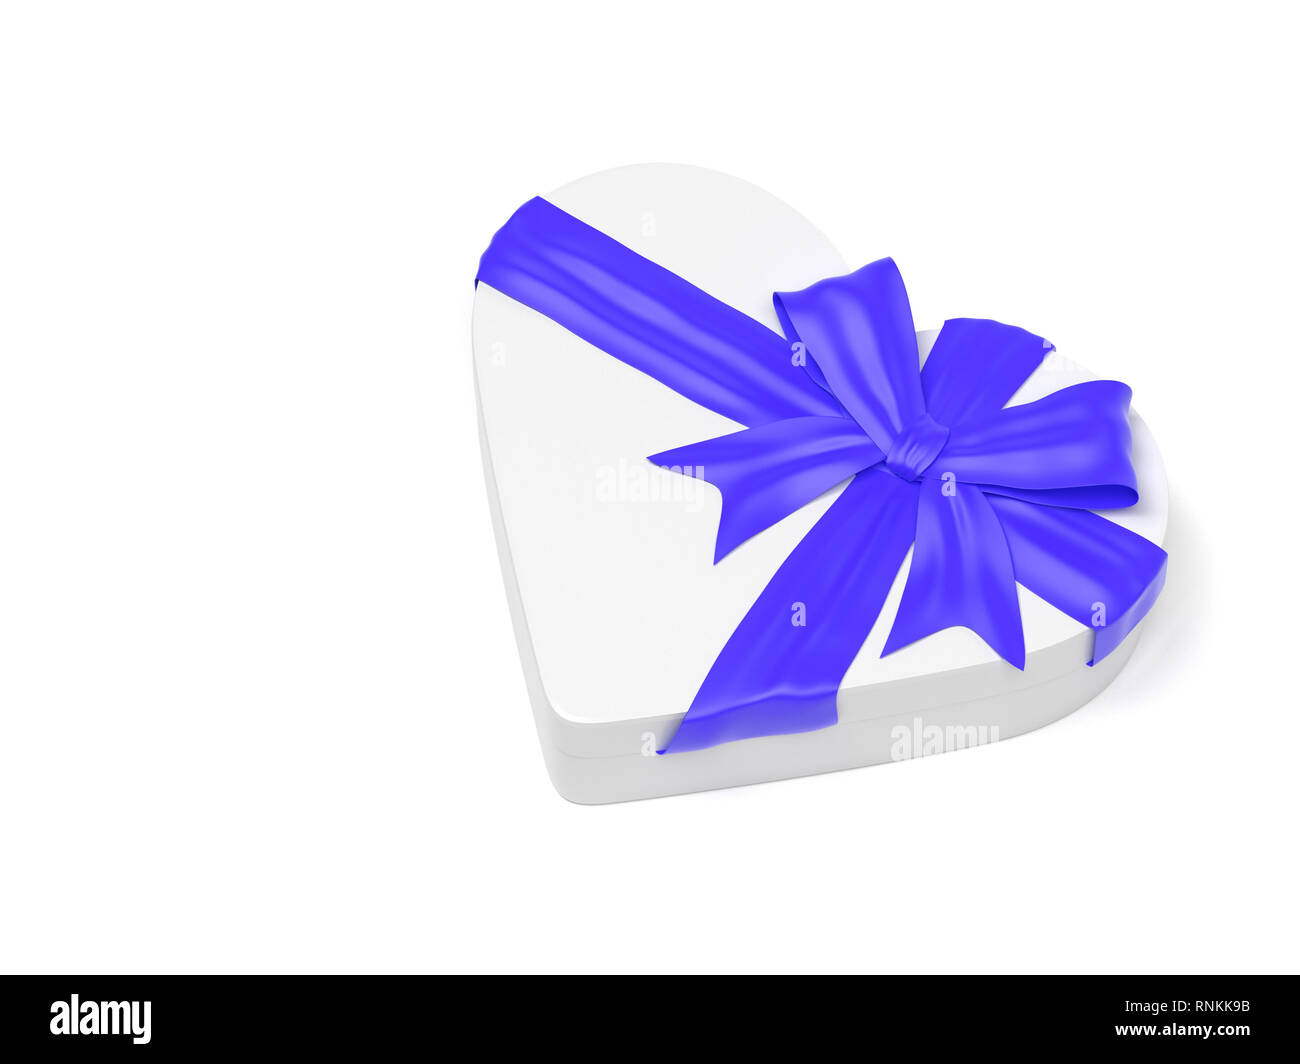 Light blue ribbon bow cut out and isolated on white background, Baby blue  gift box ribbon decor Stock Photo - Alamy